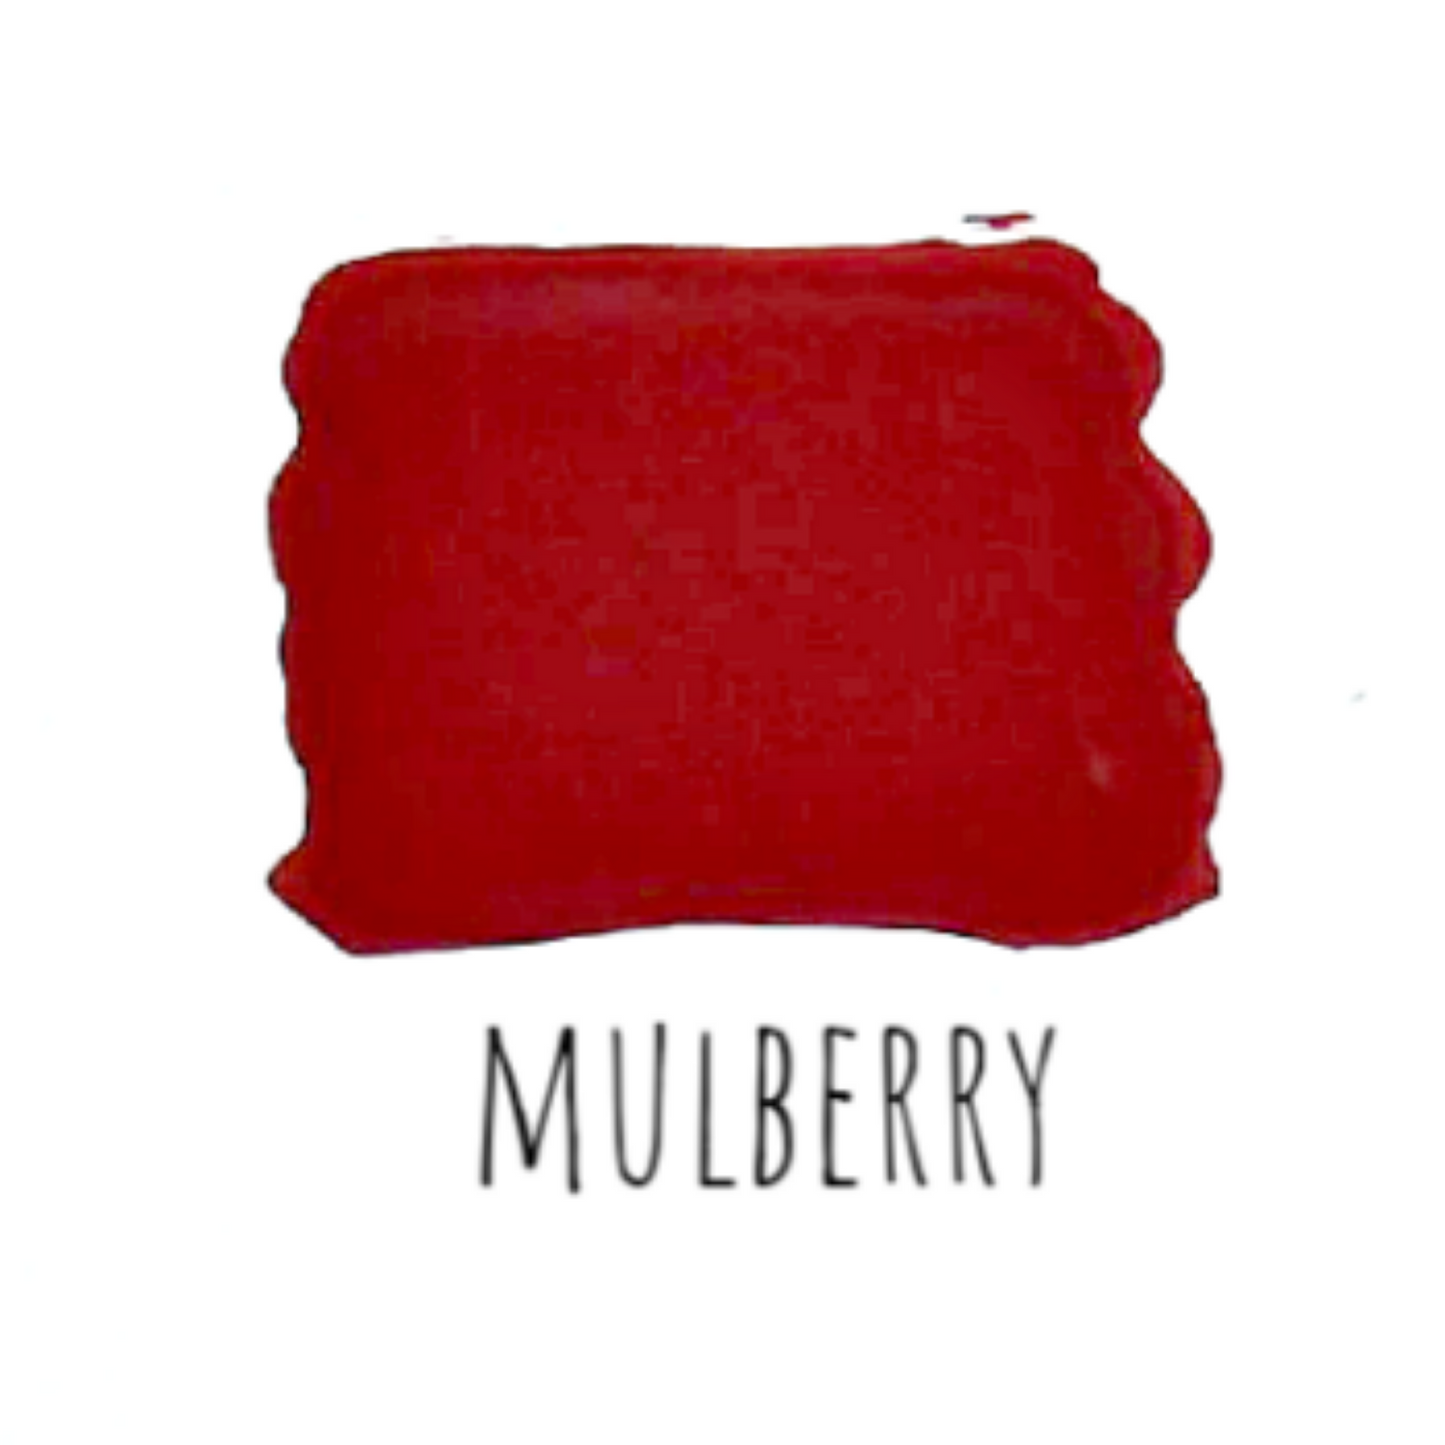 Sample paint swatch of Mulberry (red) by Sweet Pickins Milk Paint available at Milton's Daughter